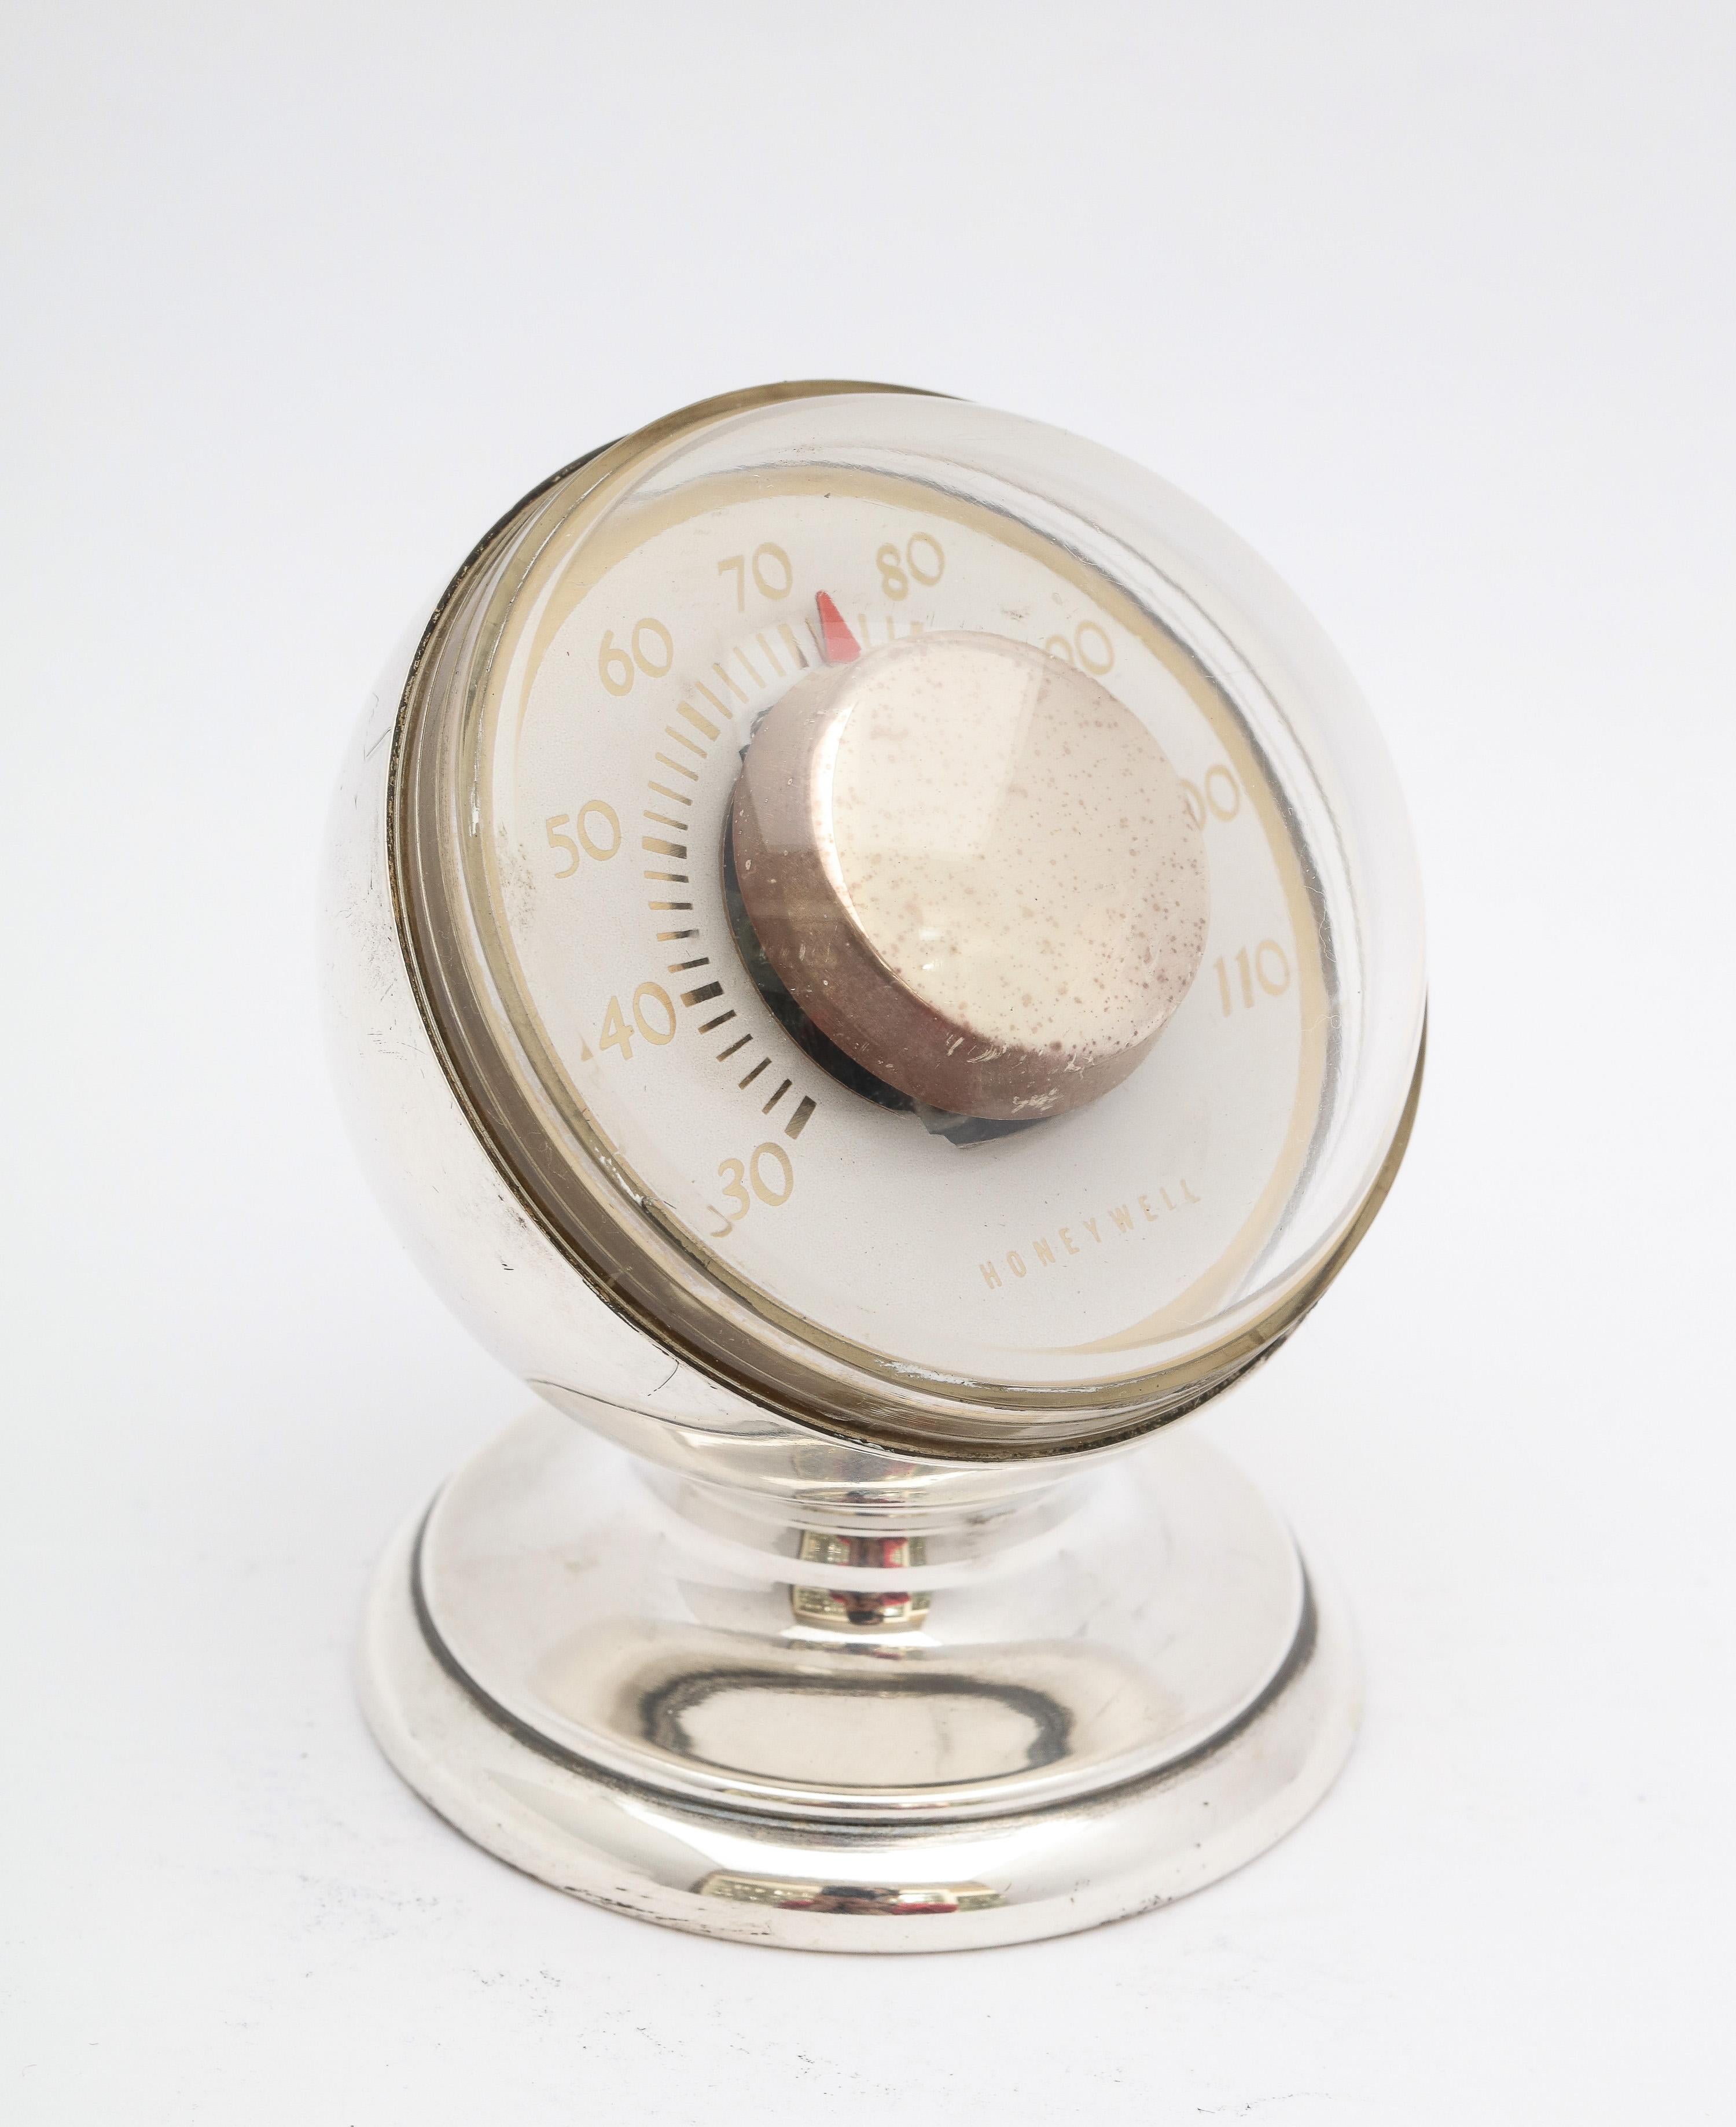 American Mid-Century Modern Sterling Silver Thermometer by Tiffany & Co.